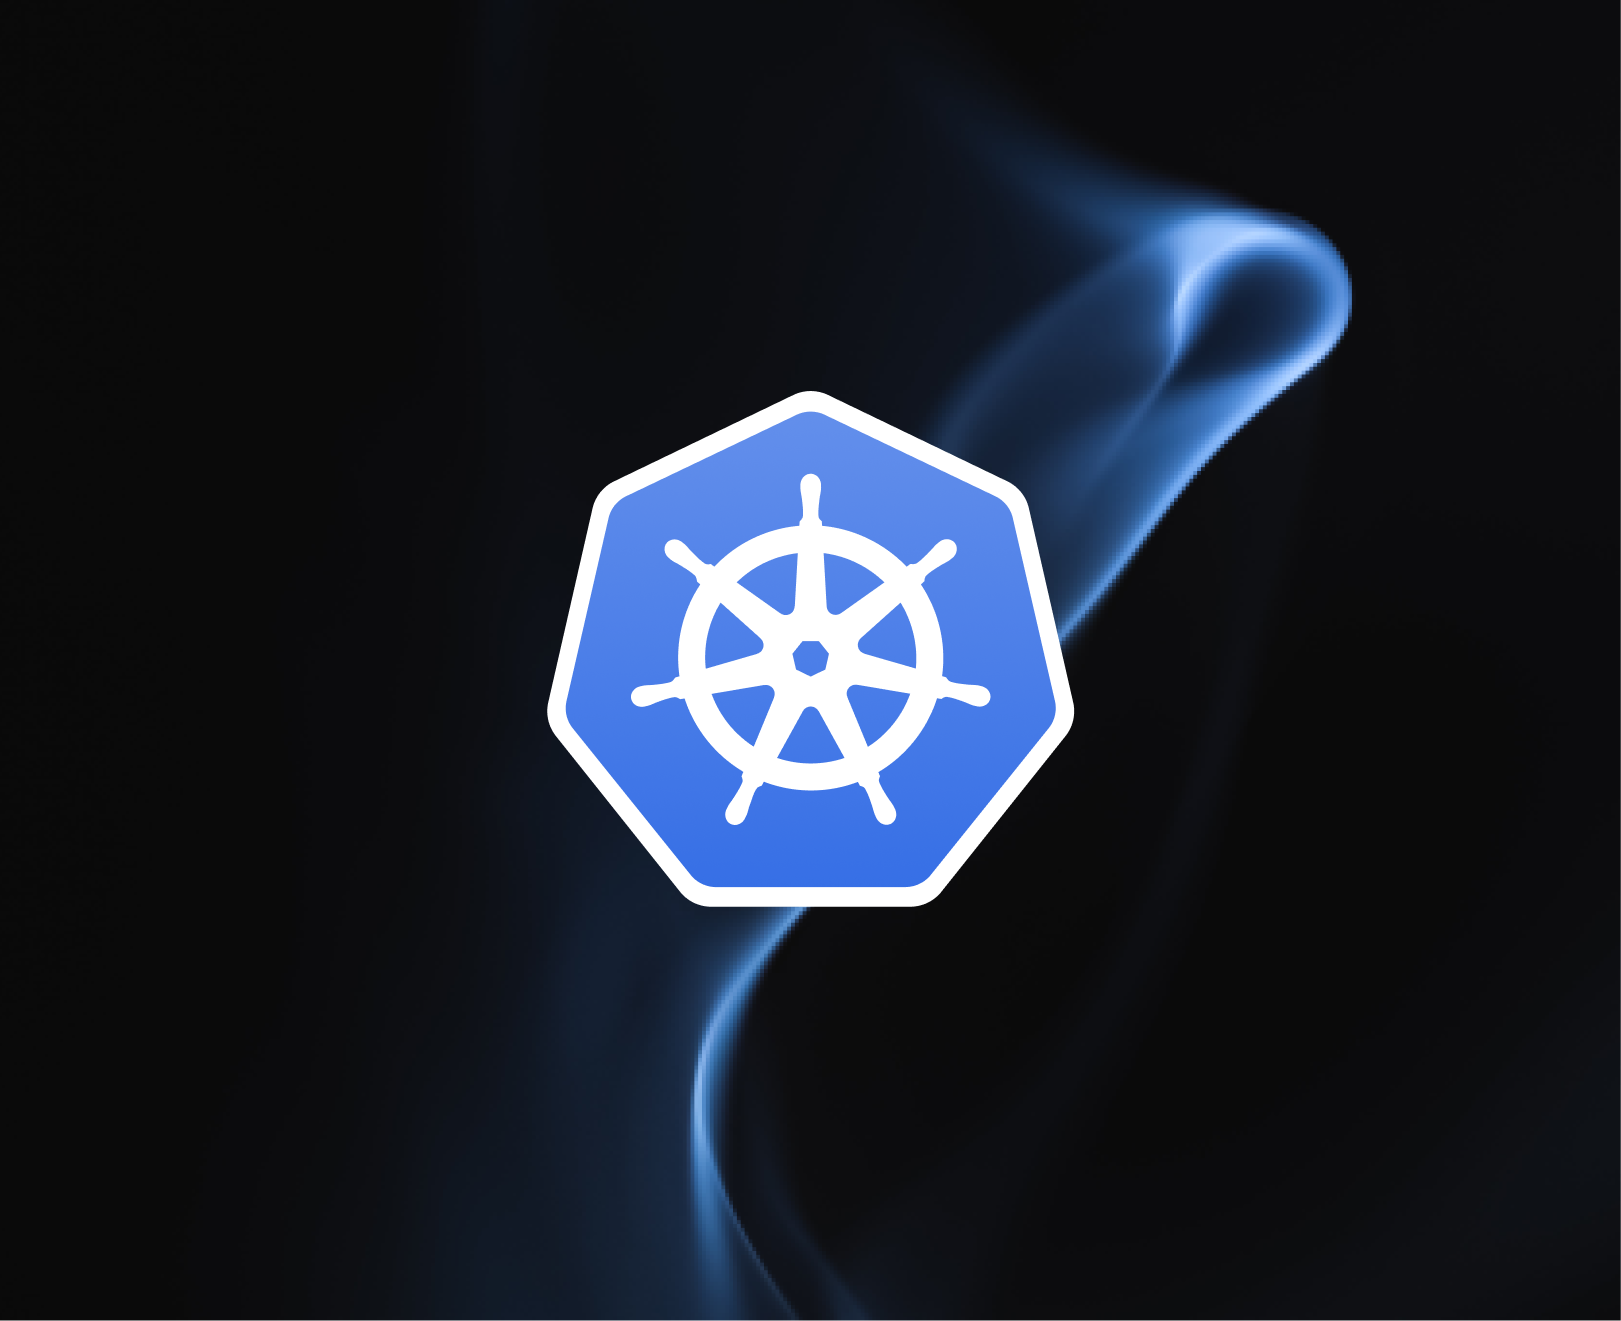 How to use Kubernetes objects